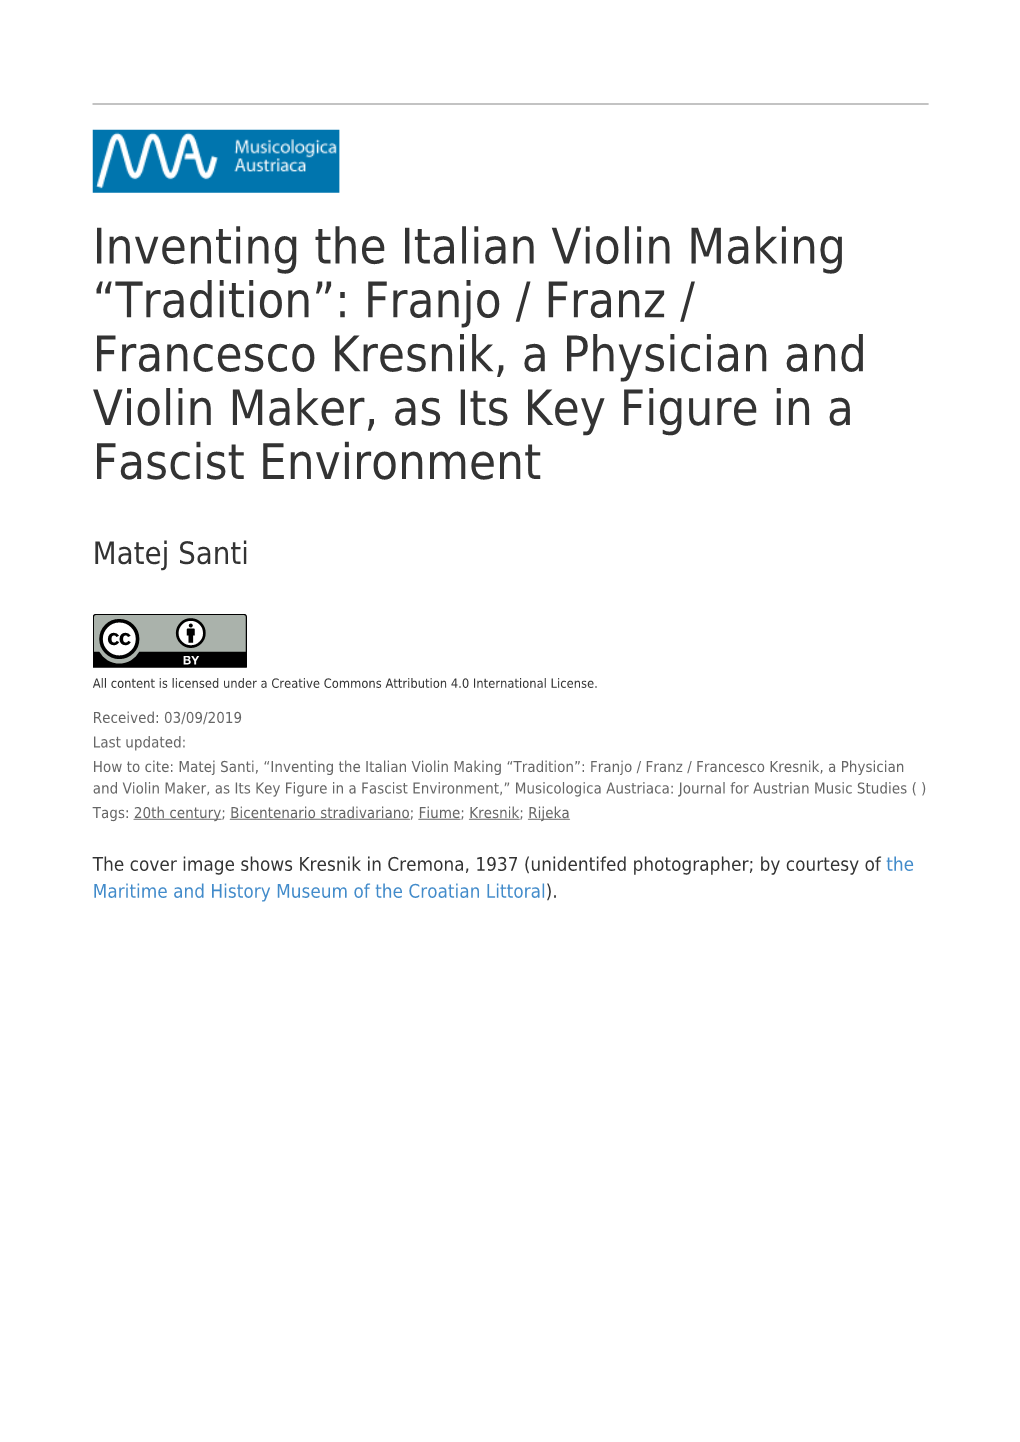 Inventing the Italian Violin Making “Tradition”: Franjo / Franz / Francesco Kresnik, a Physician and Violin Maker, As Its Key Figure in a Fascist Environment